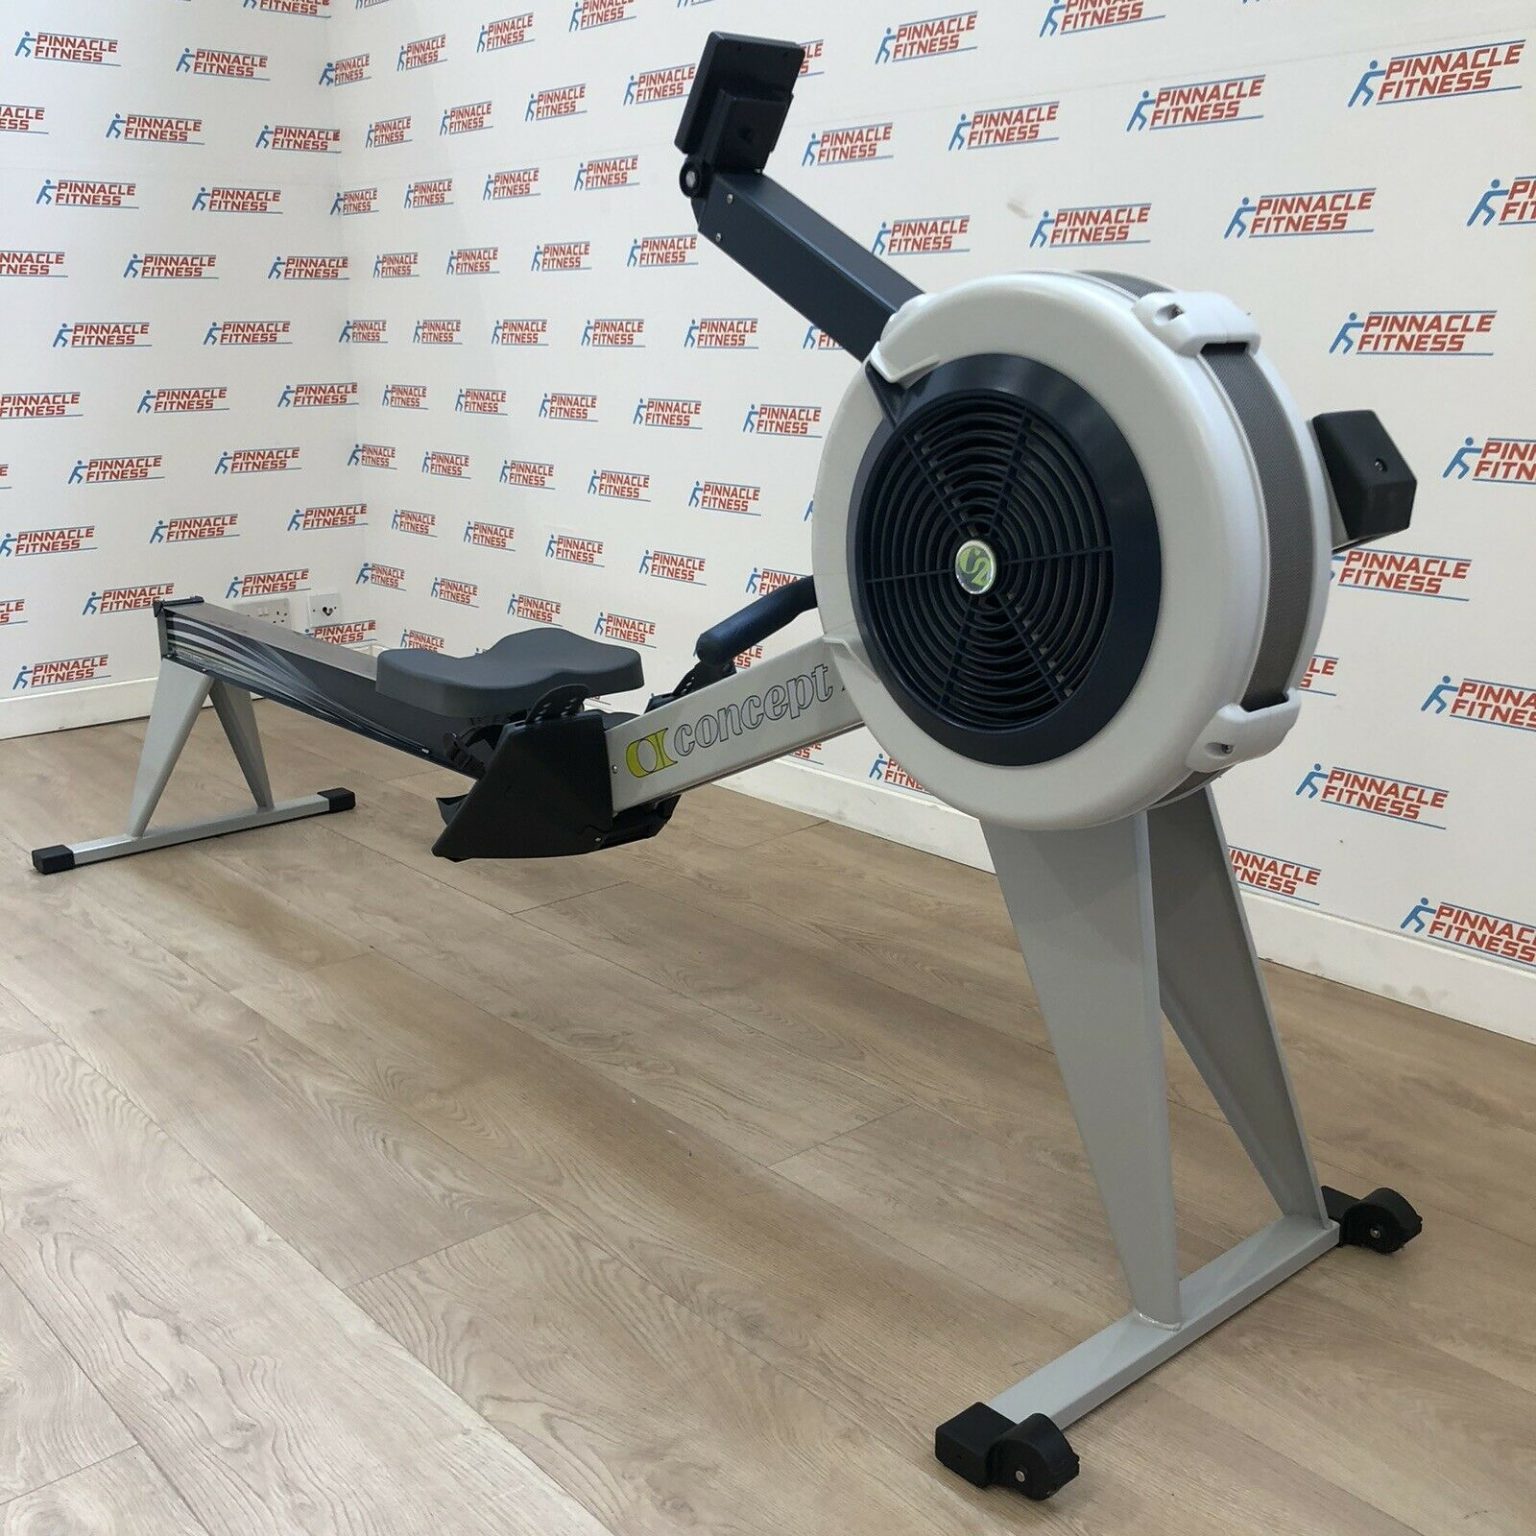 Concept 2 Model E Rowing Machine With PM5 Console Refurbished 184397637341 1536x1536 